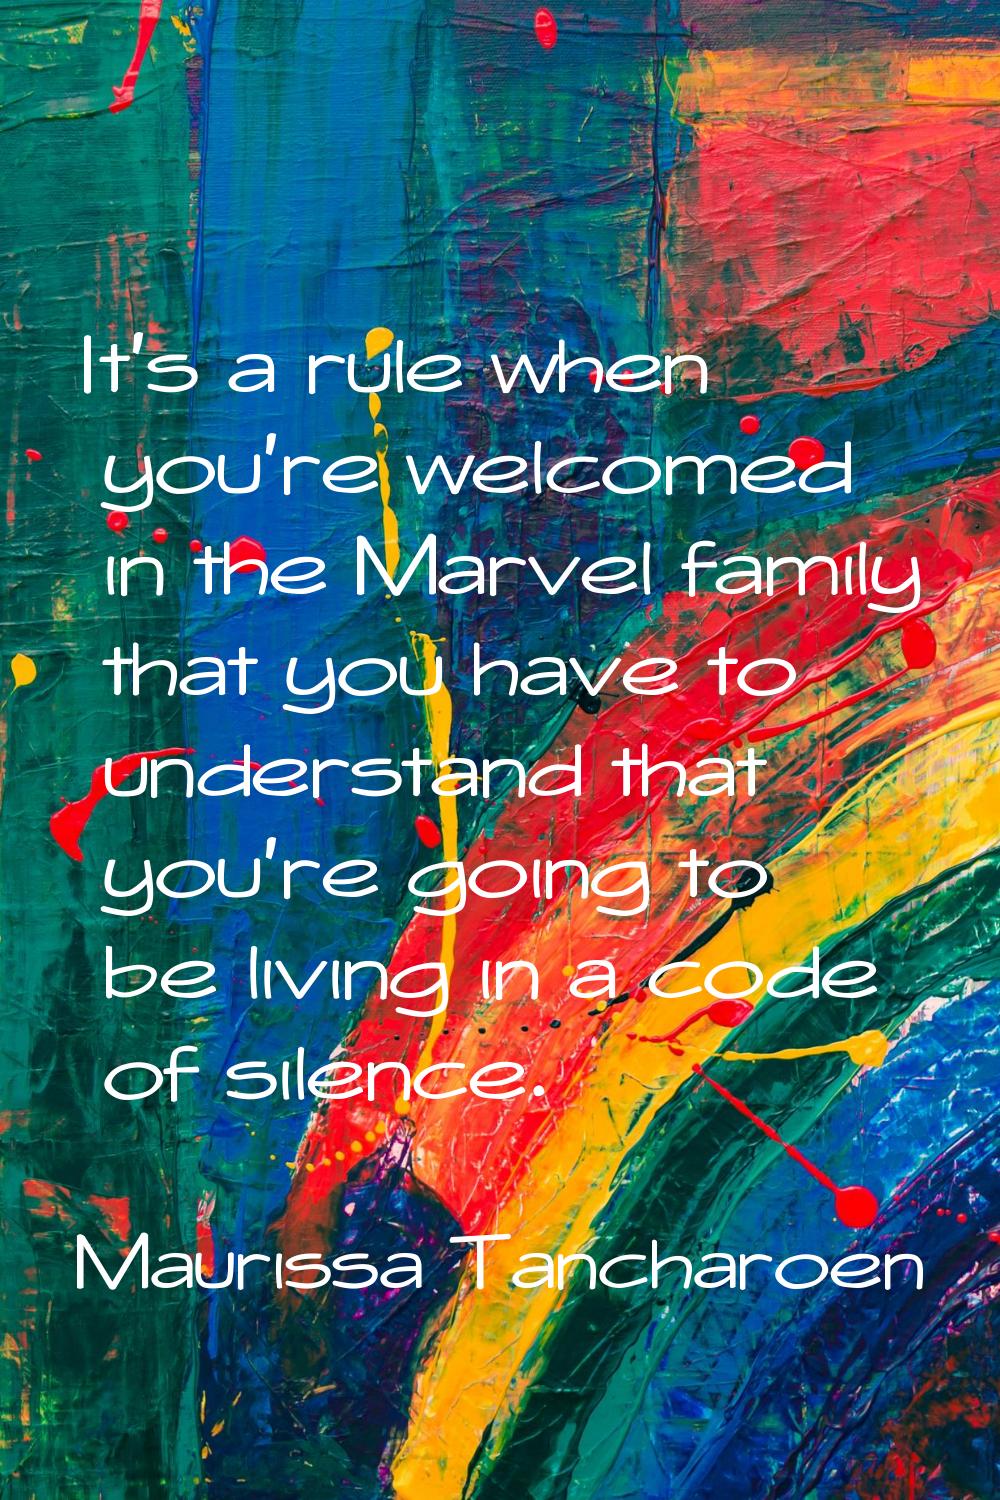 It's a rule when you're welcomed in the Marvel family that you have to understand that you're going